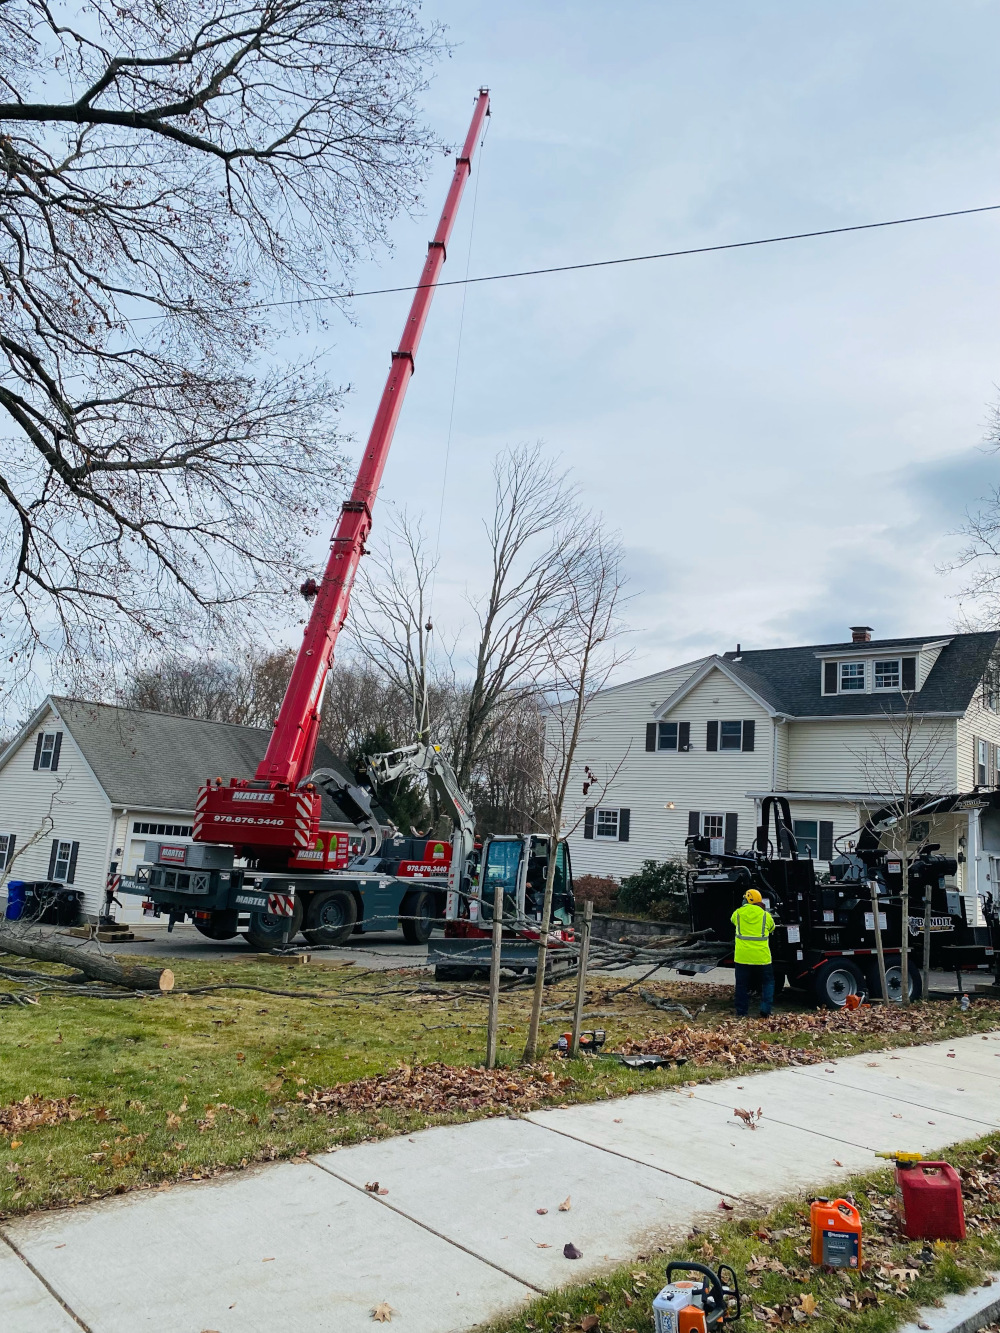 The new red crane and crew removed multiple trees at this location in Bedford, MA.